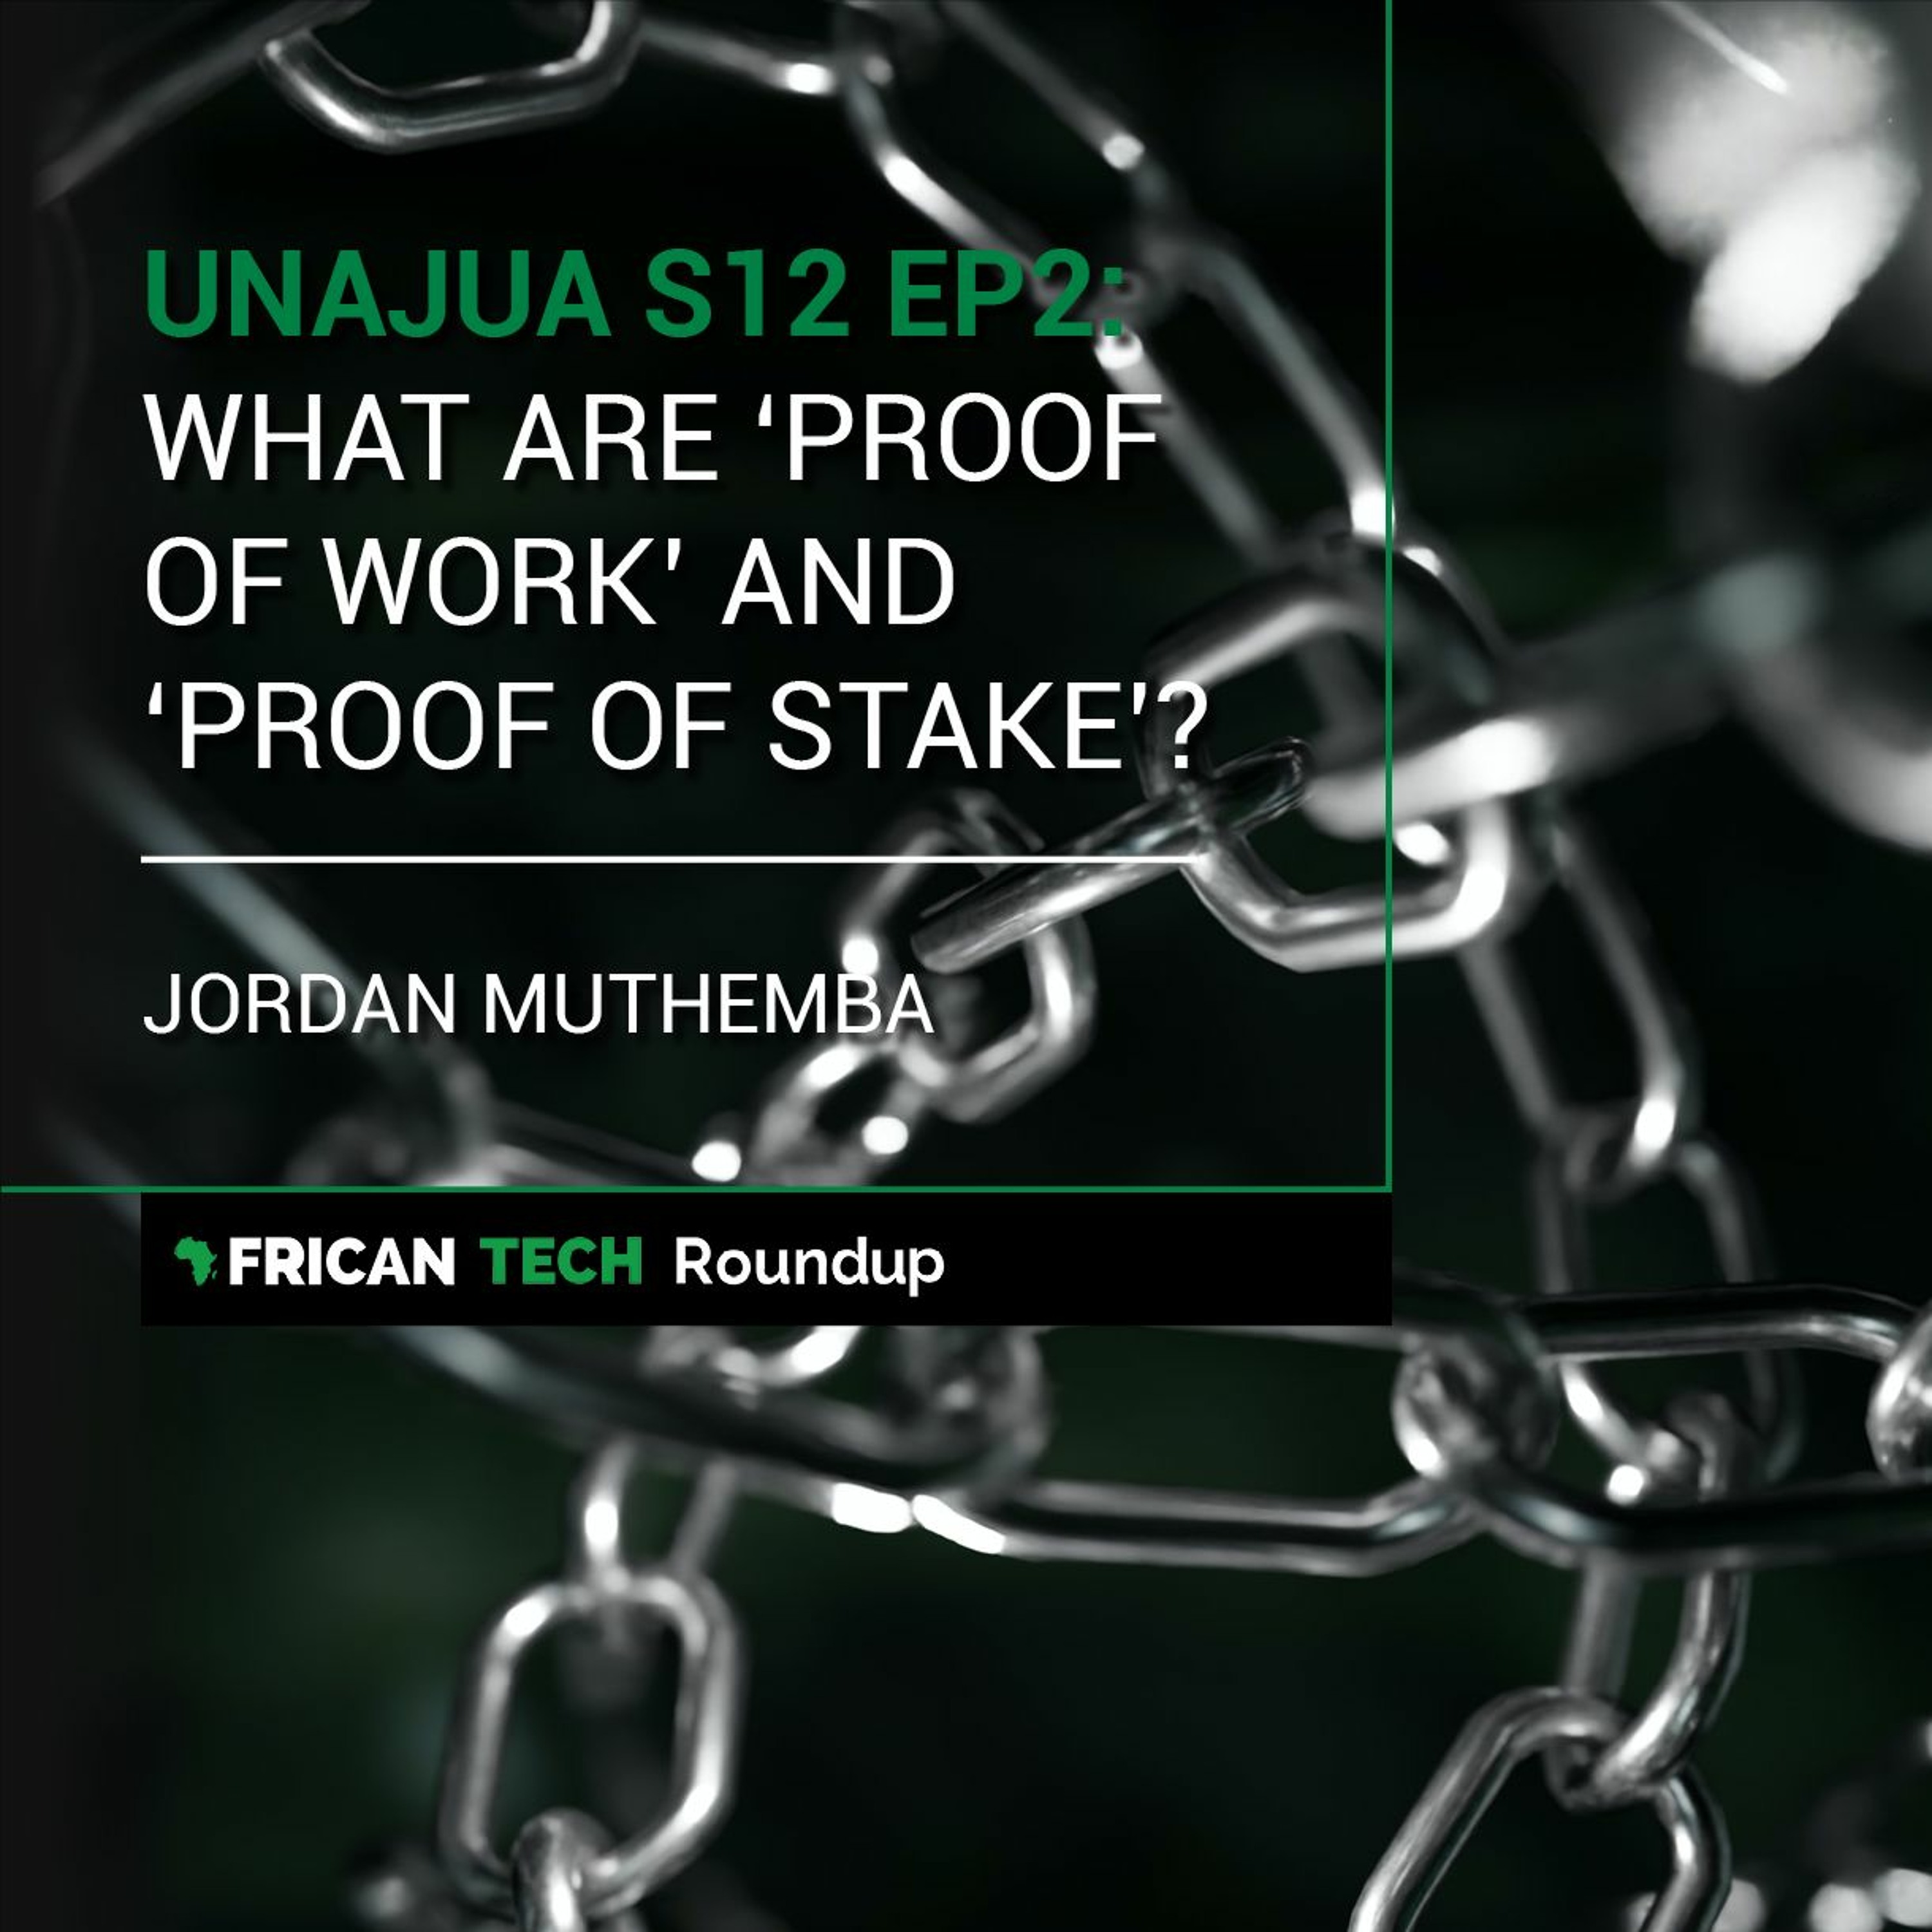 UNAJUA S12 EP2: What are ’Proof of Work’ and ’Proof of Stake’? feat. Jordan Muthemba